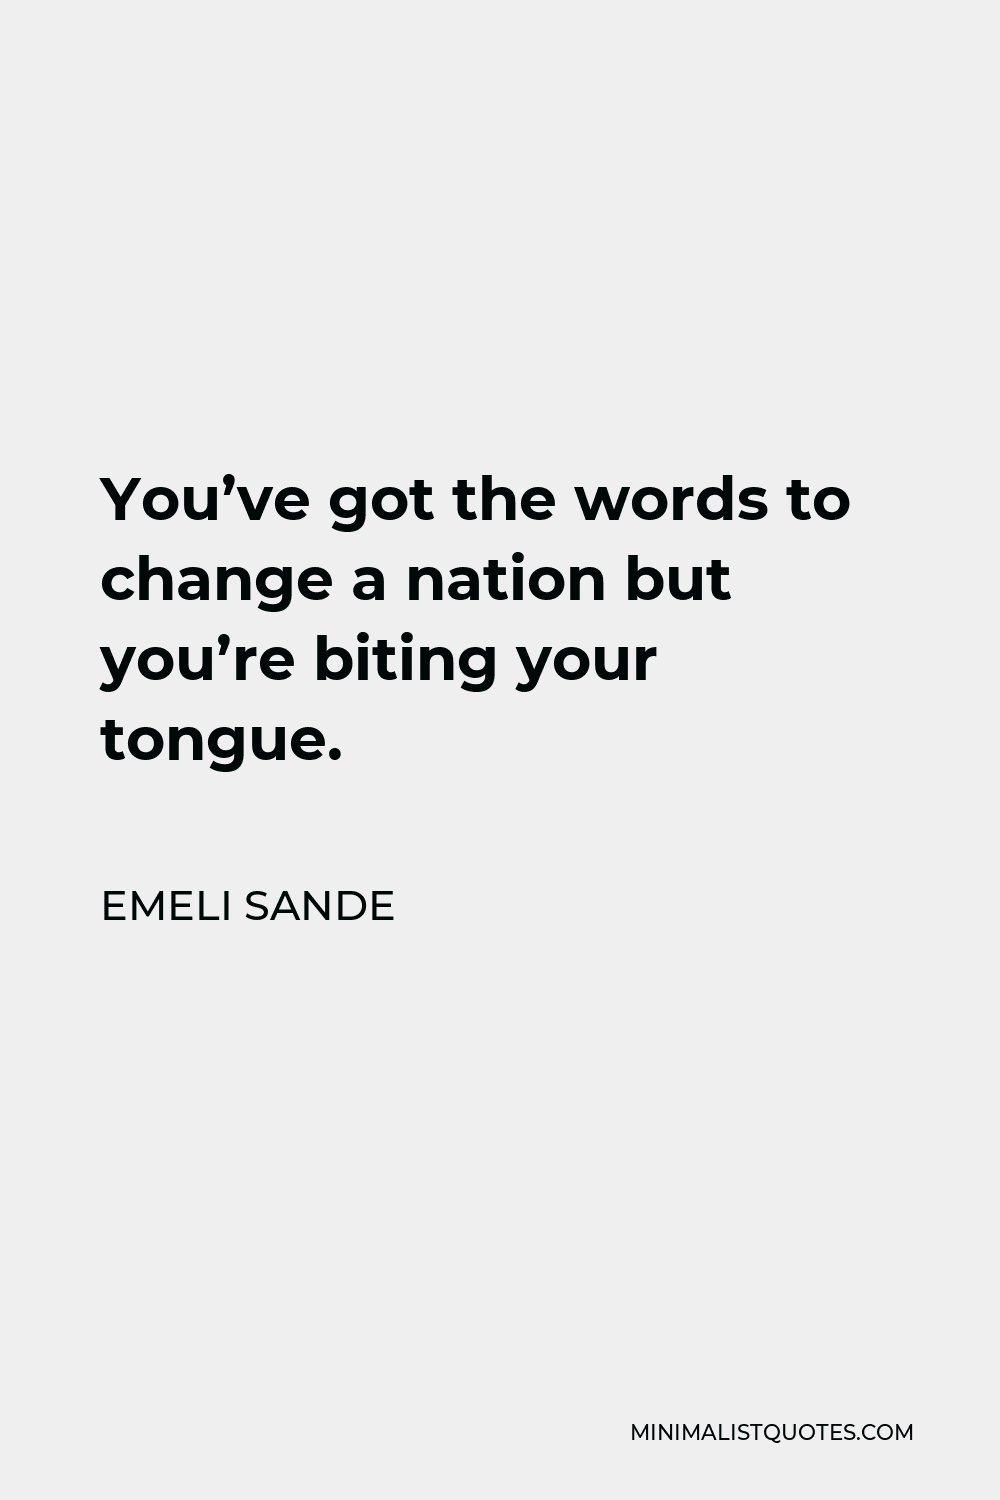 Emeli Sande Quote - You’ve got the words to change a nation but you’re biting your tongue.